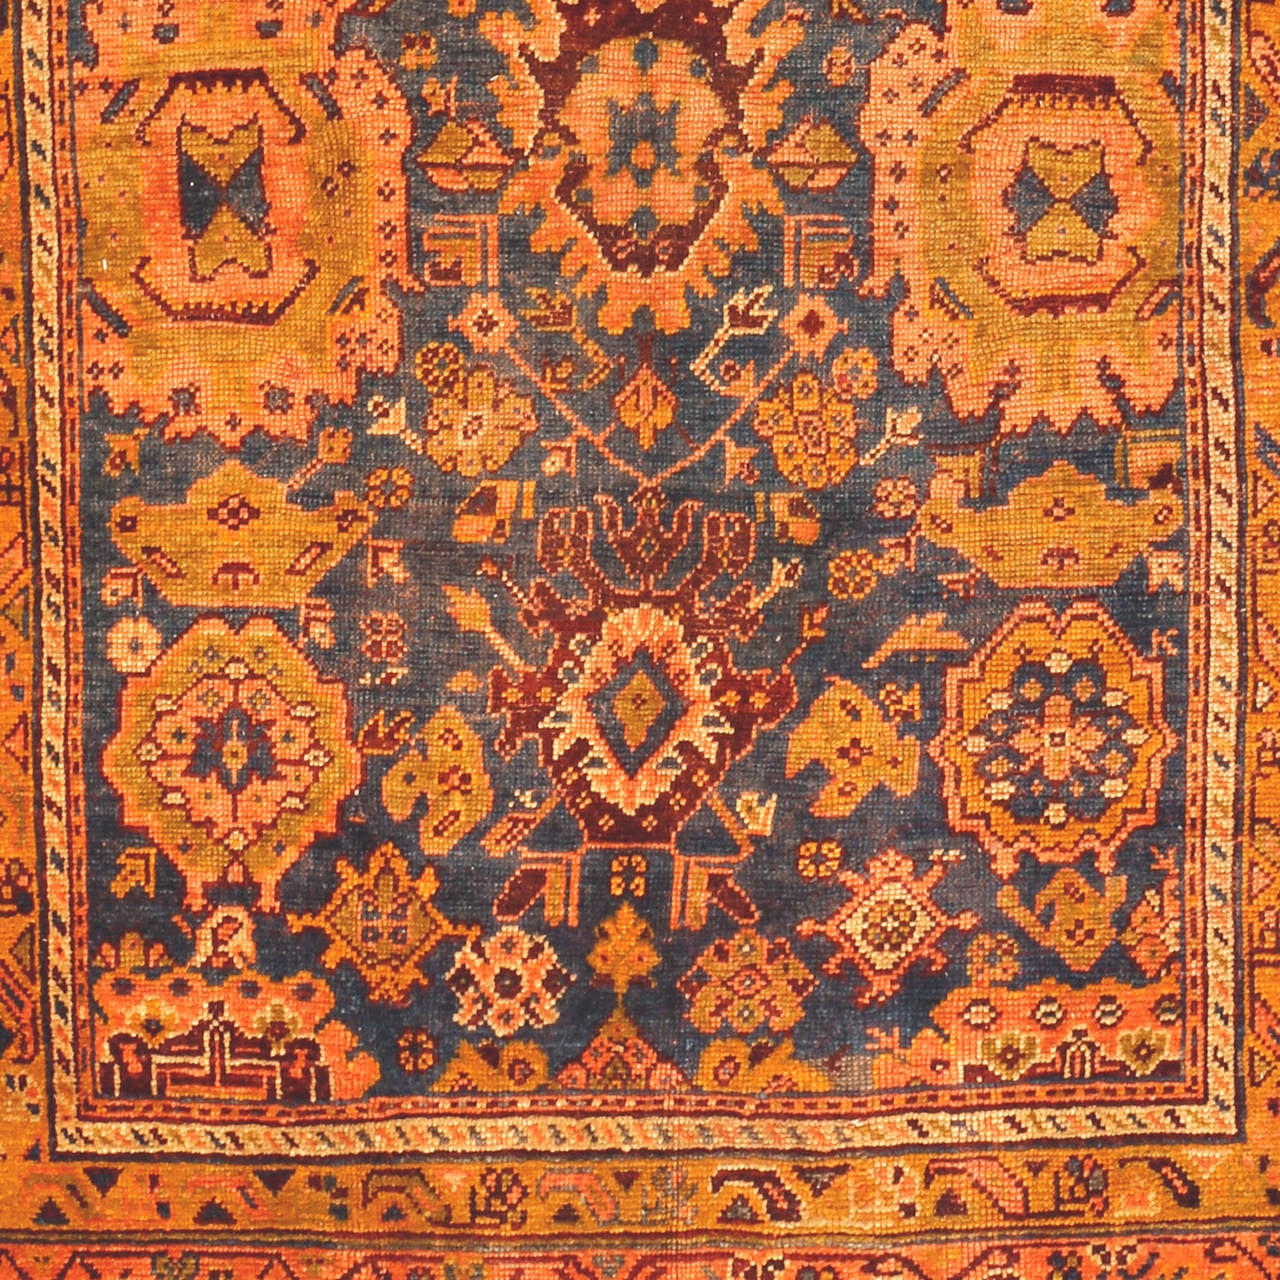 A refined Oushak carpet distinguished by an all-over pattern of large-scale palmettes of the 'Harshang' type, derived from 17th and 18th century Safavid Persian rugs, set against a light blue background. Oushaks were very much in demand in Europe